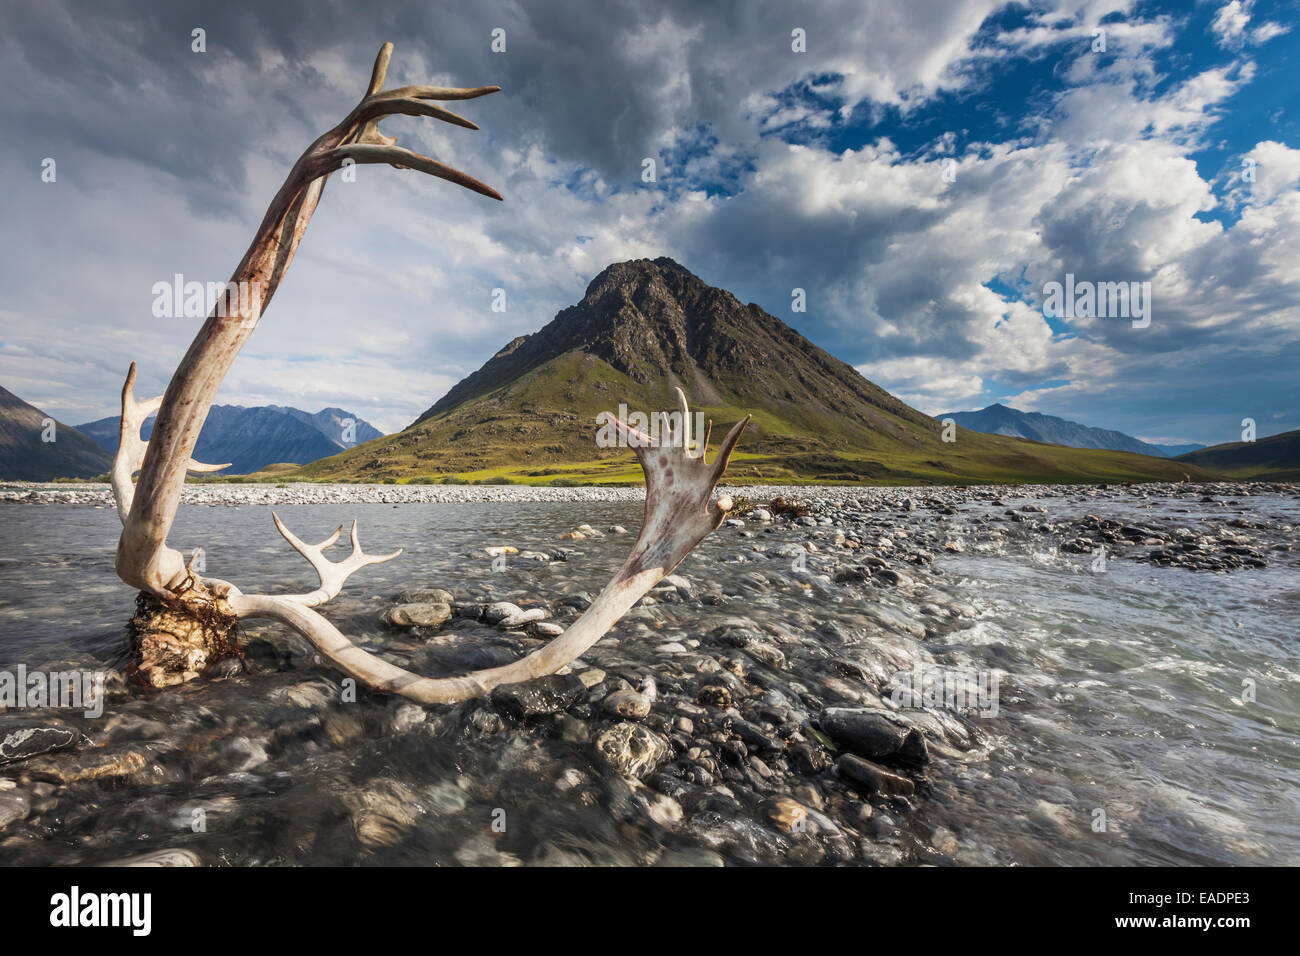 Caribou antlers in the Marsh Fork of the Canning river, Arctic National Wildlife Refuge, Brooks range mountains, Alaska. Stock Photo